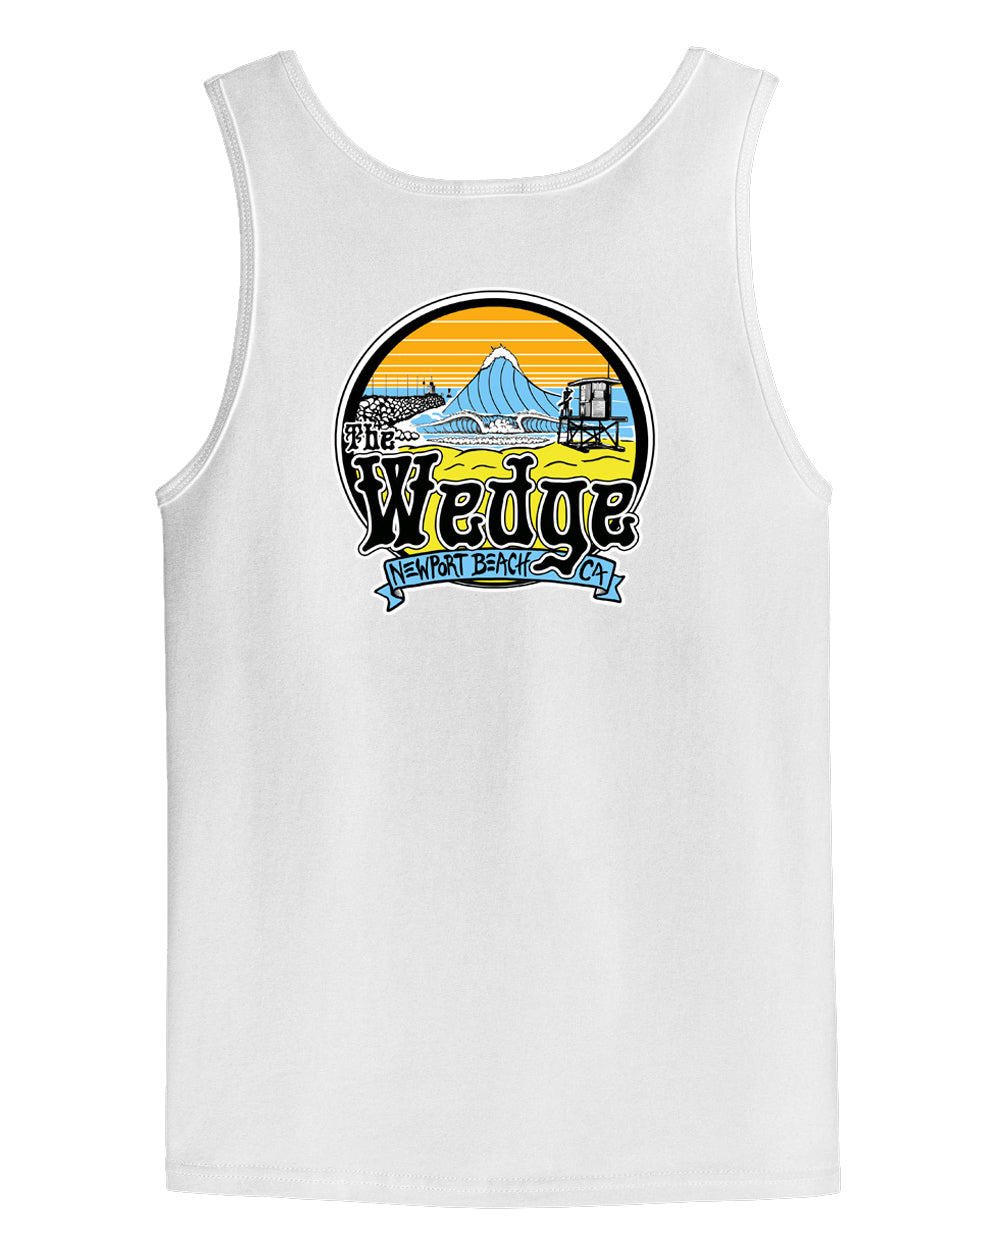 Wedge Griffin Tank Top - White